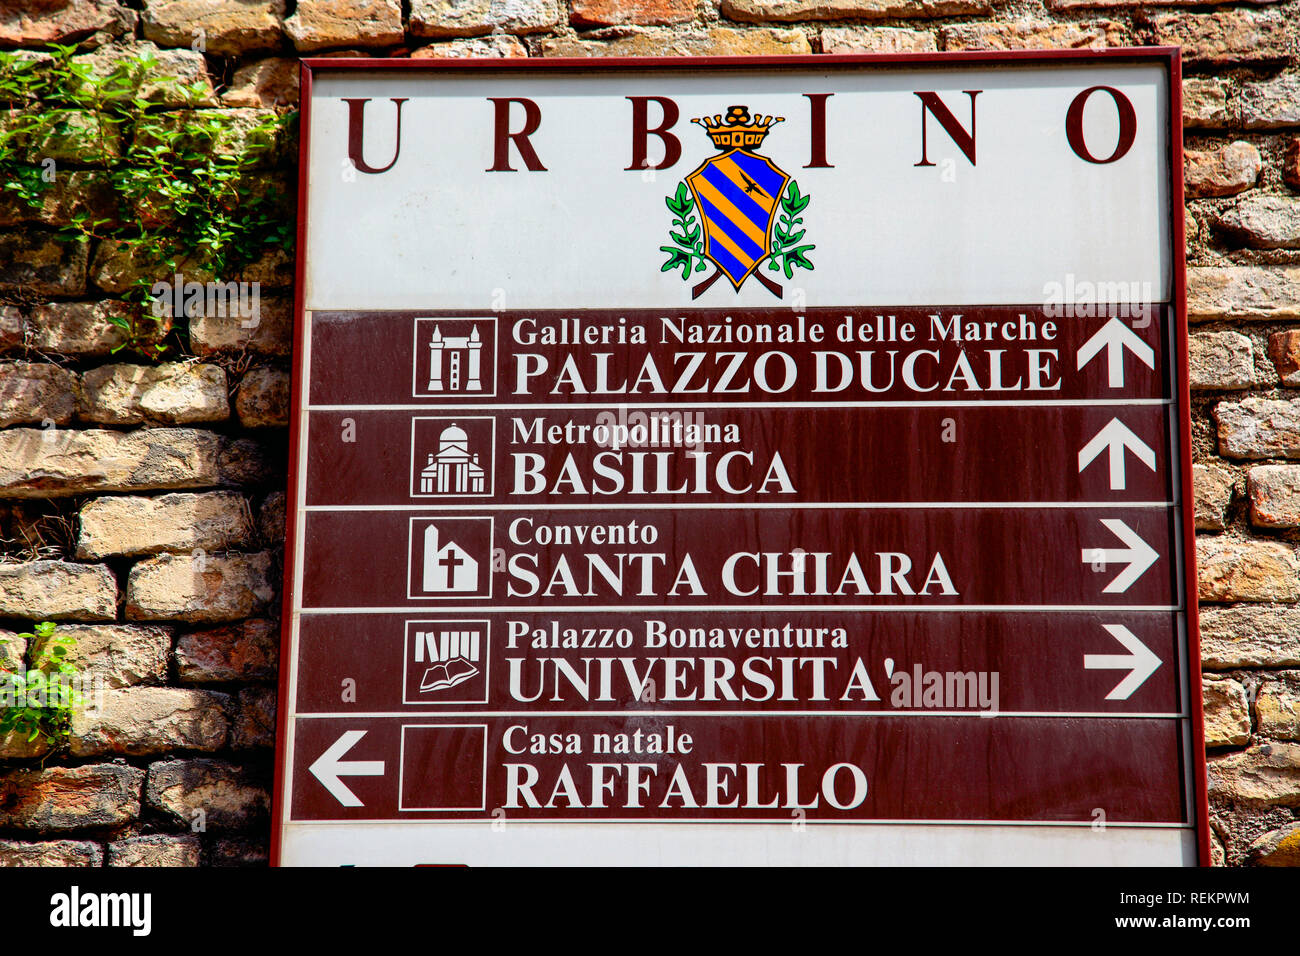 A sign giving directions to various attractions in Urbino. Stock Photo